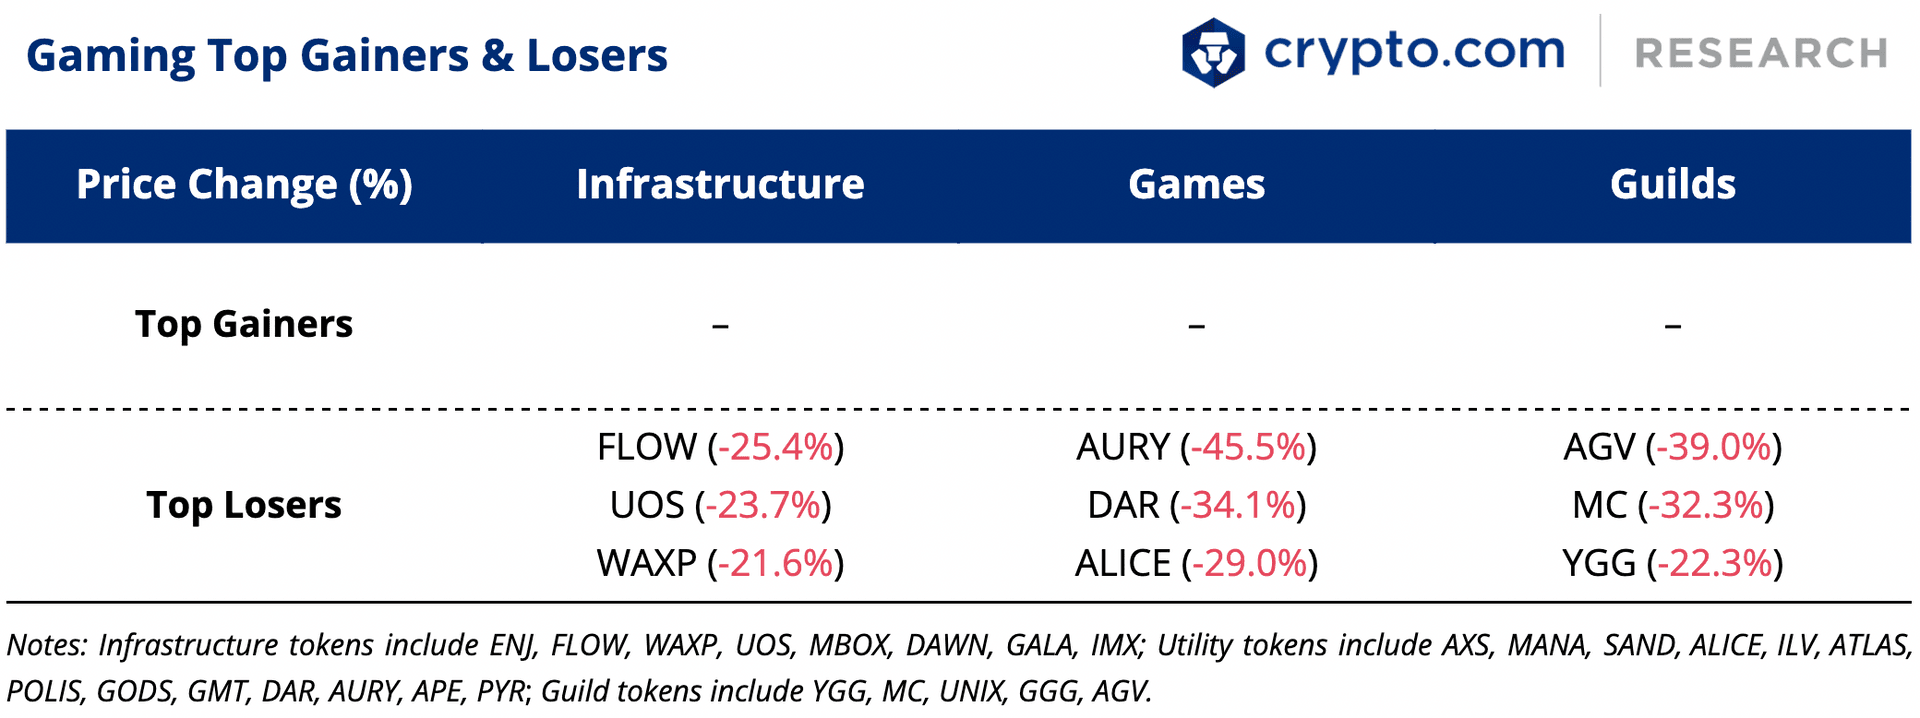 Gaming Top Gainers and Losers